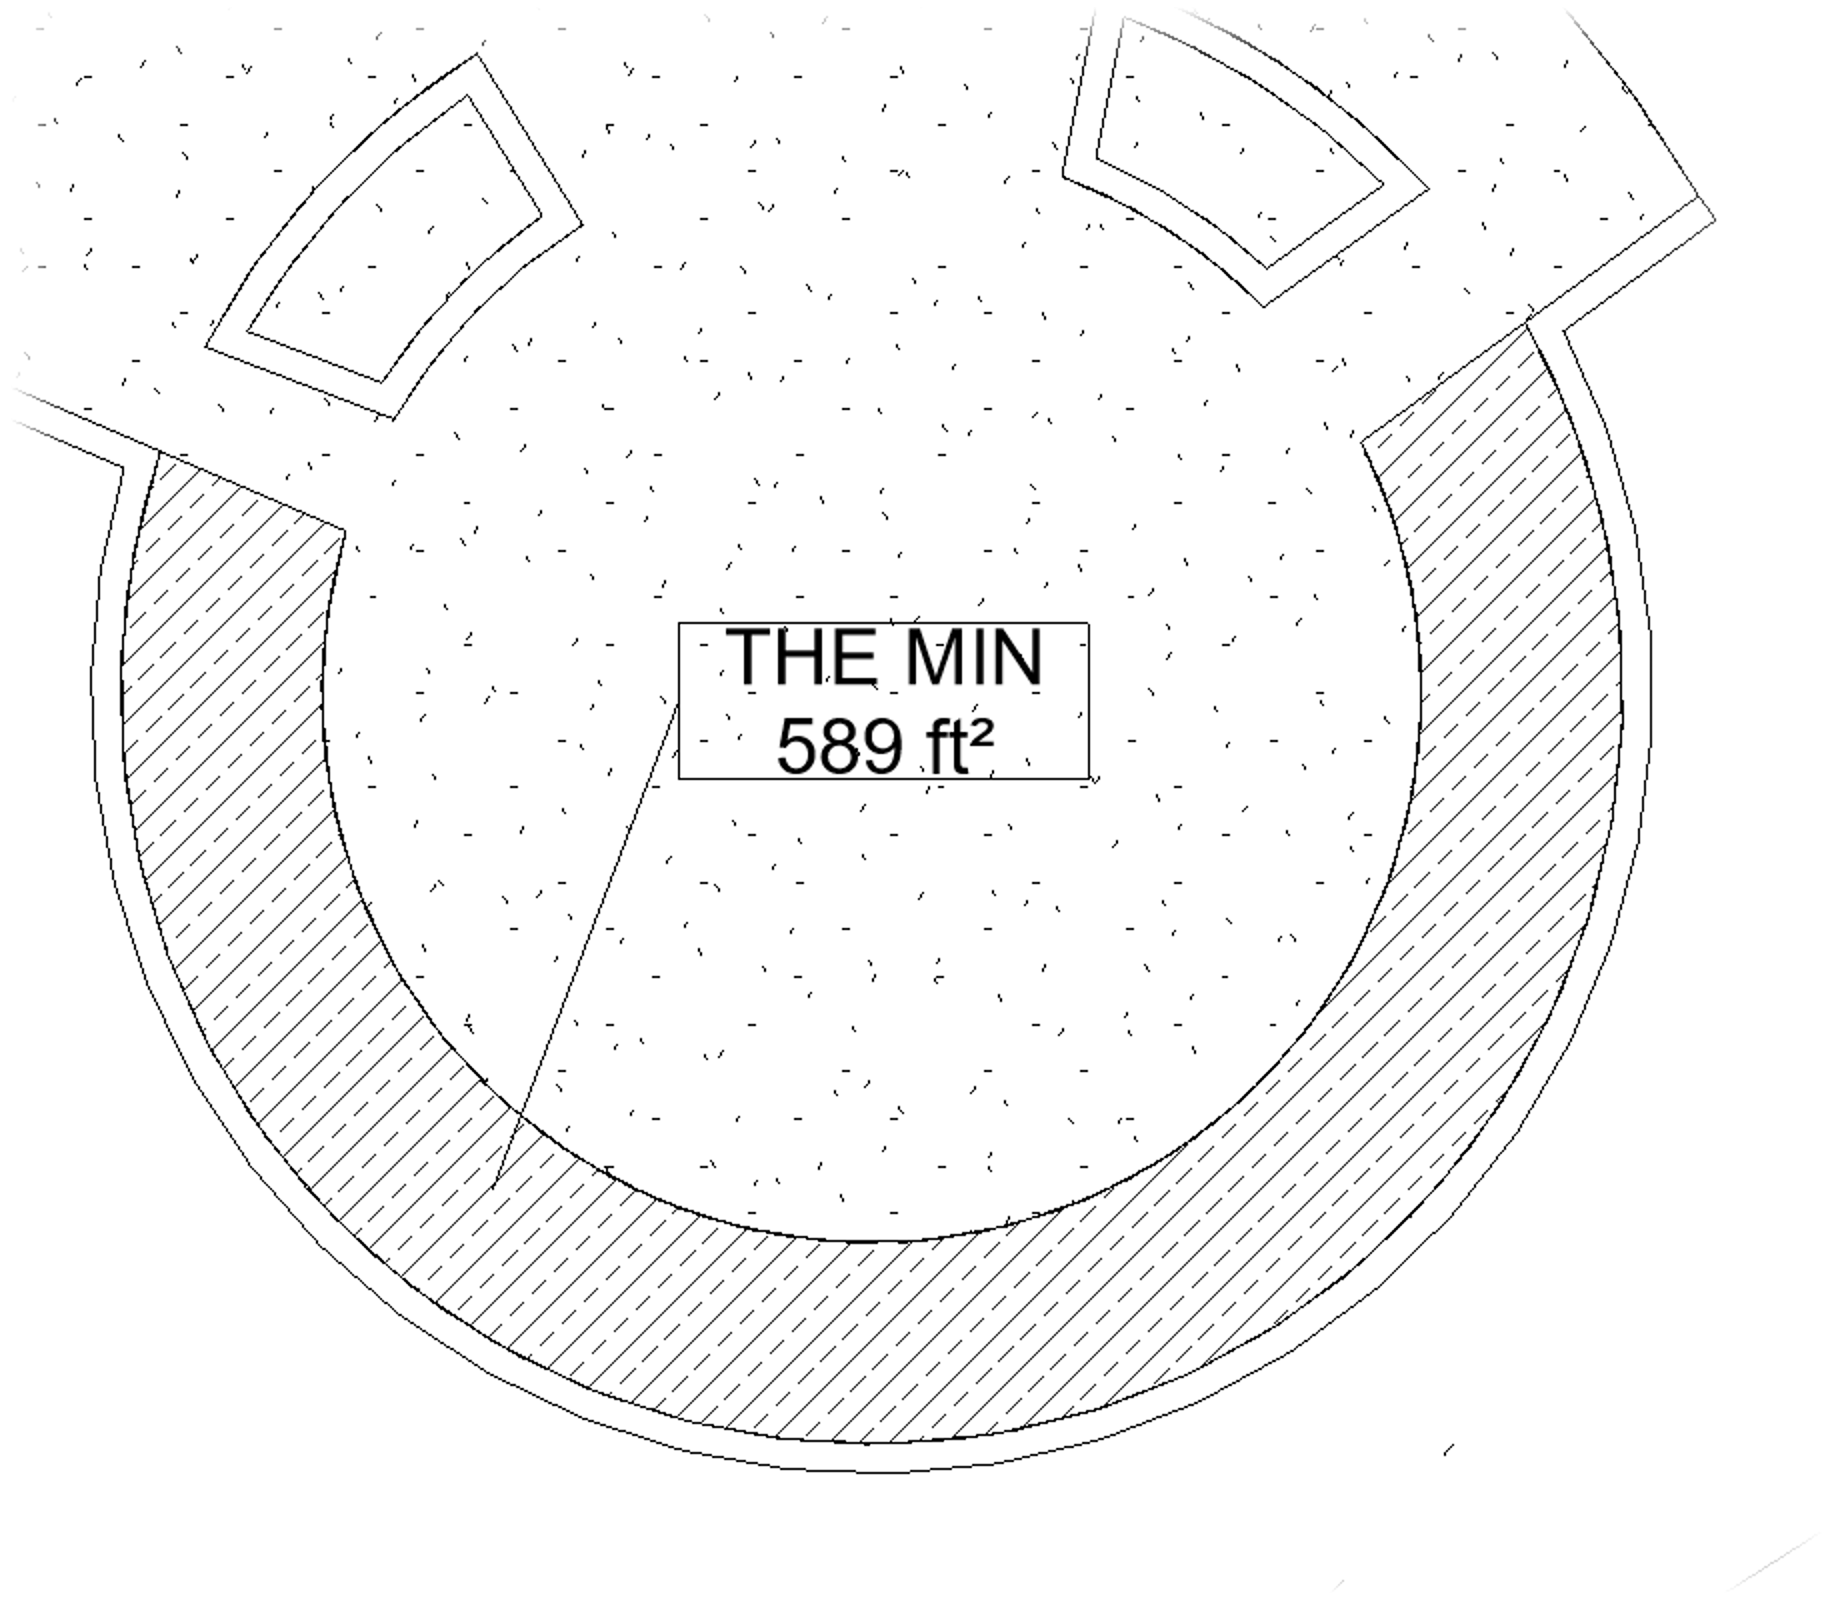 Groundcover label showing quantity based on square area